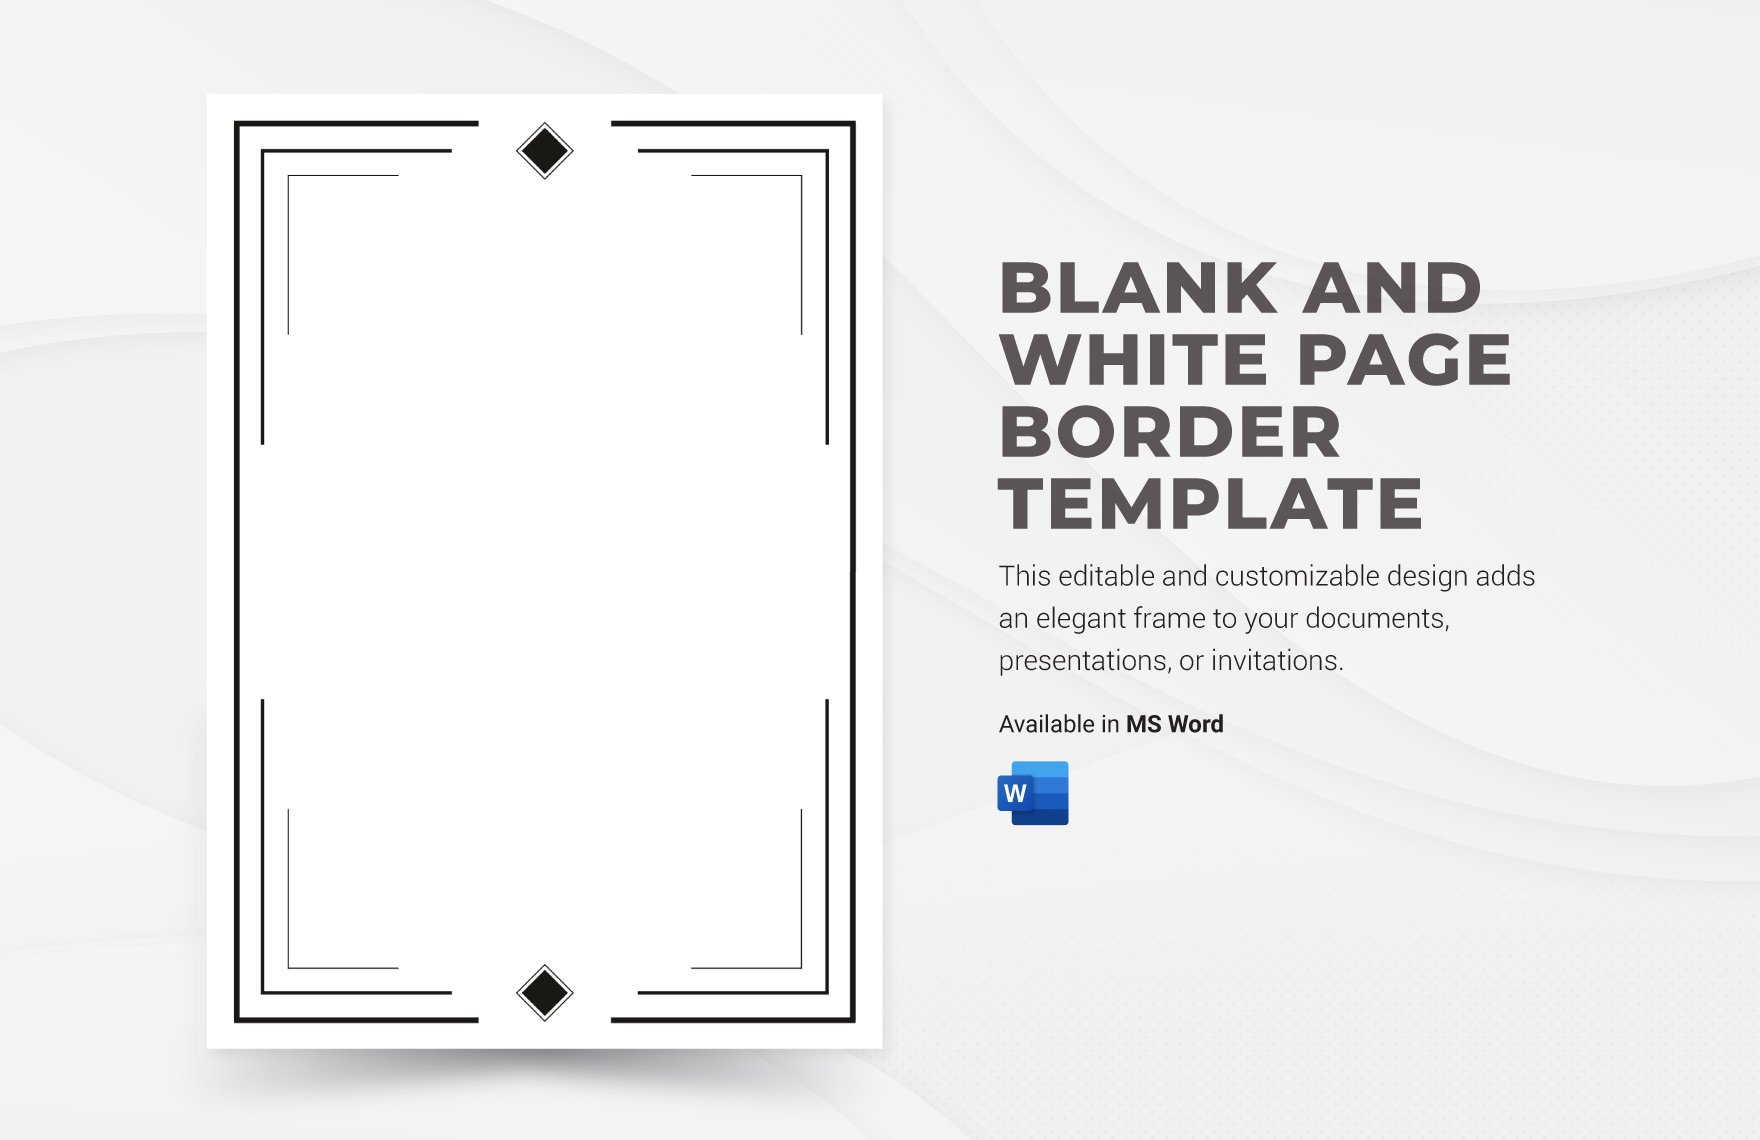 Black and White Page Border Template